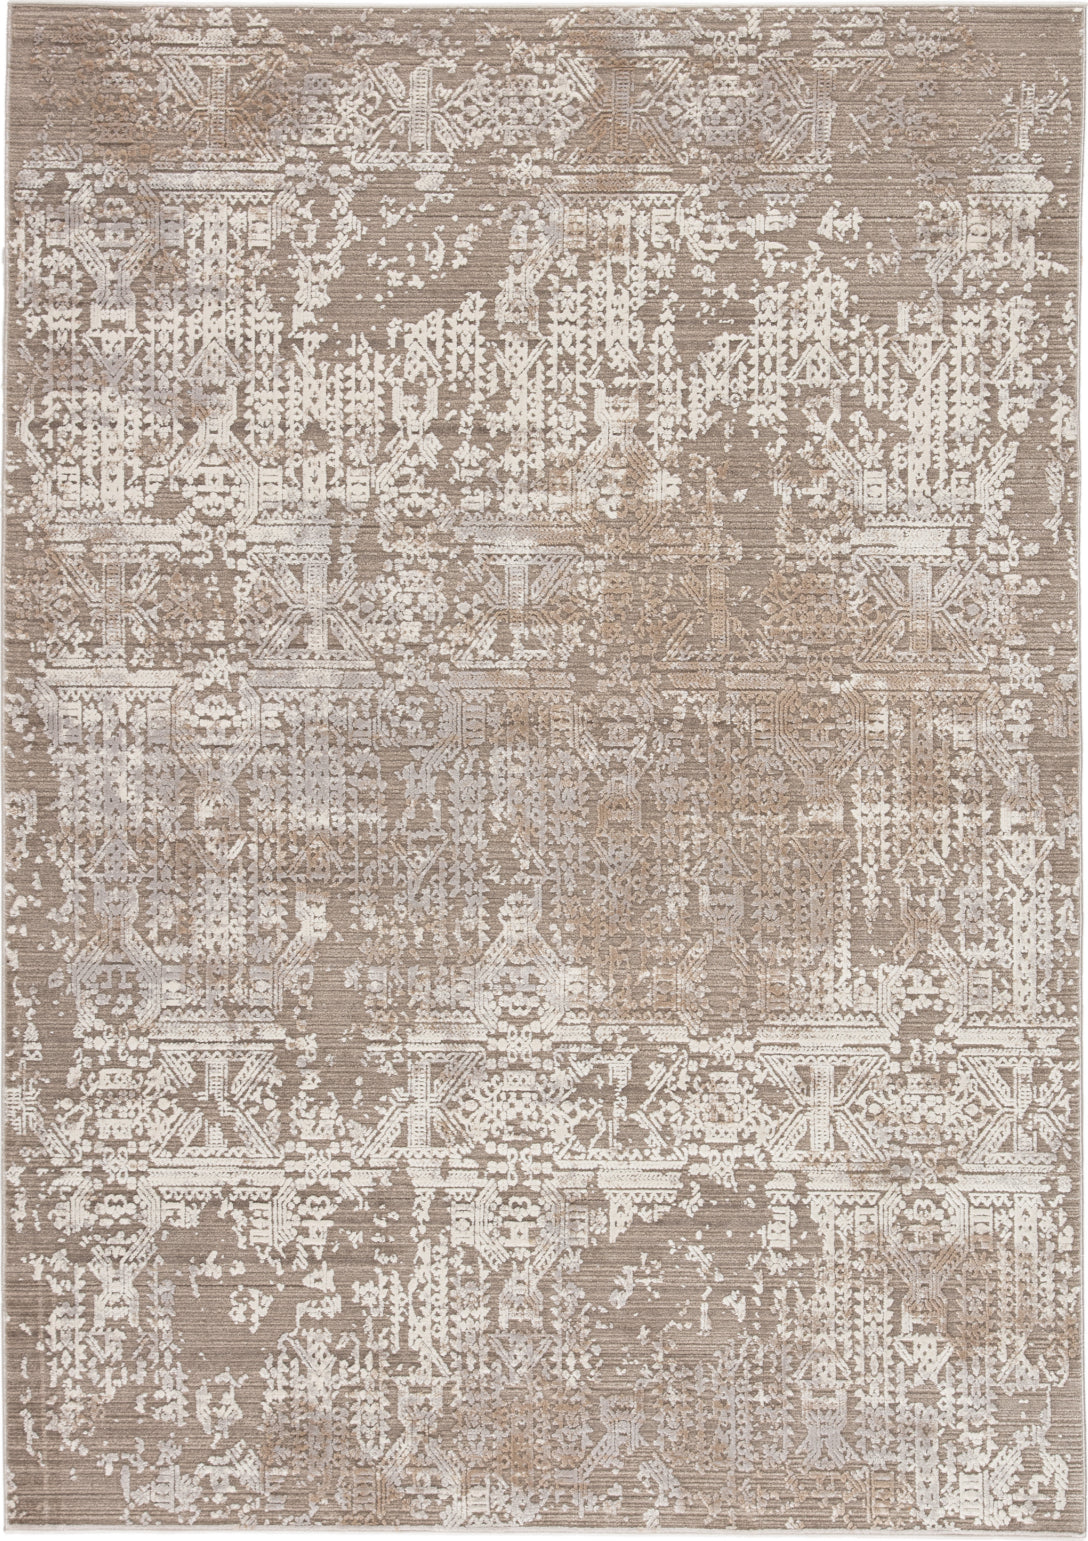 Jaipur Living Brienne Irsia BNN03 Gray/Light Taupe Area Rug by Vibe